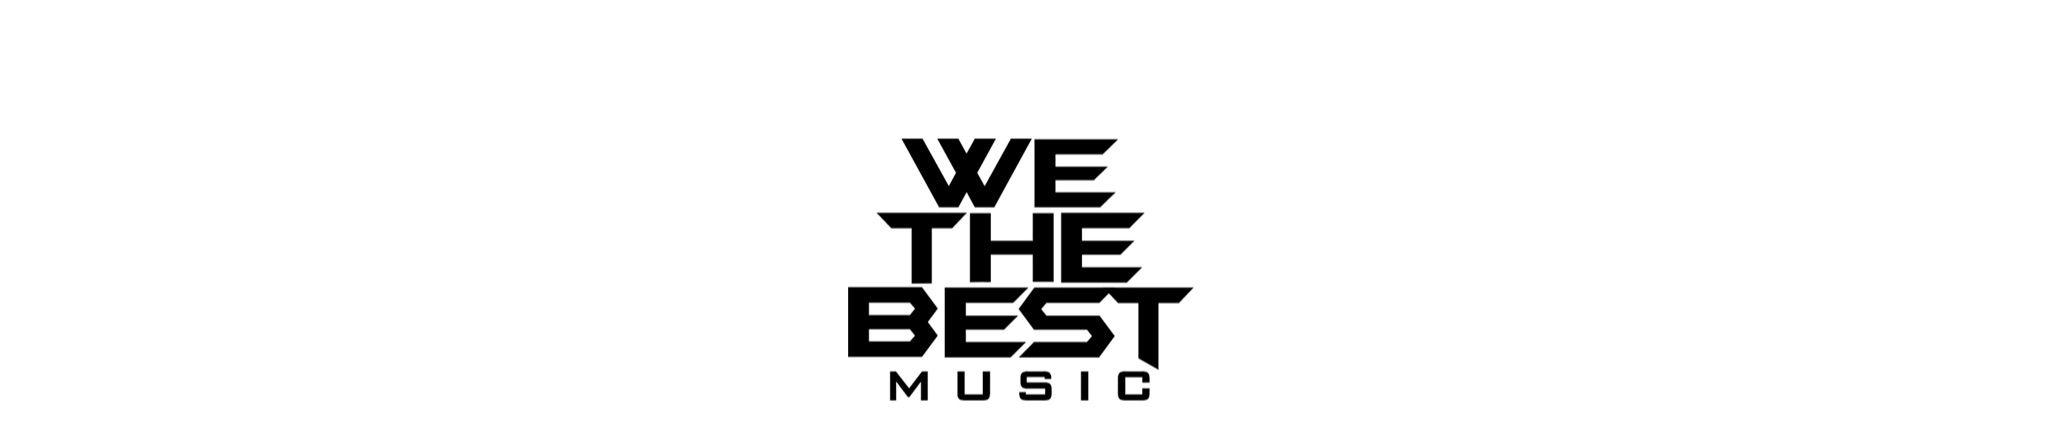 We the Best Logo - WE THE BEST MUSIC GROUP | Free Listening on SoundCloud